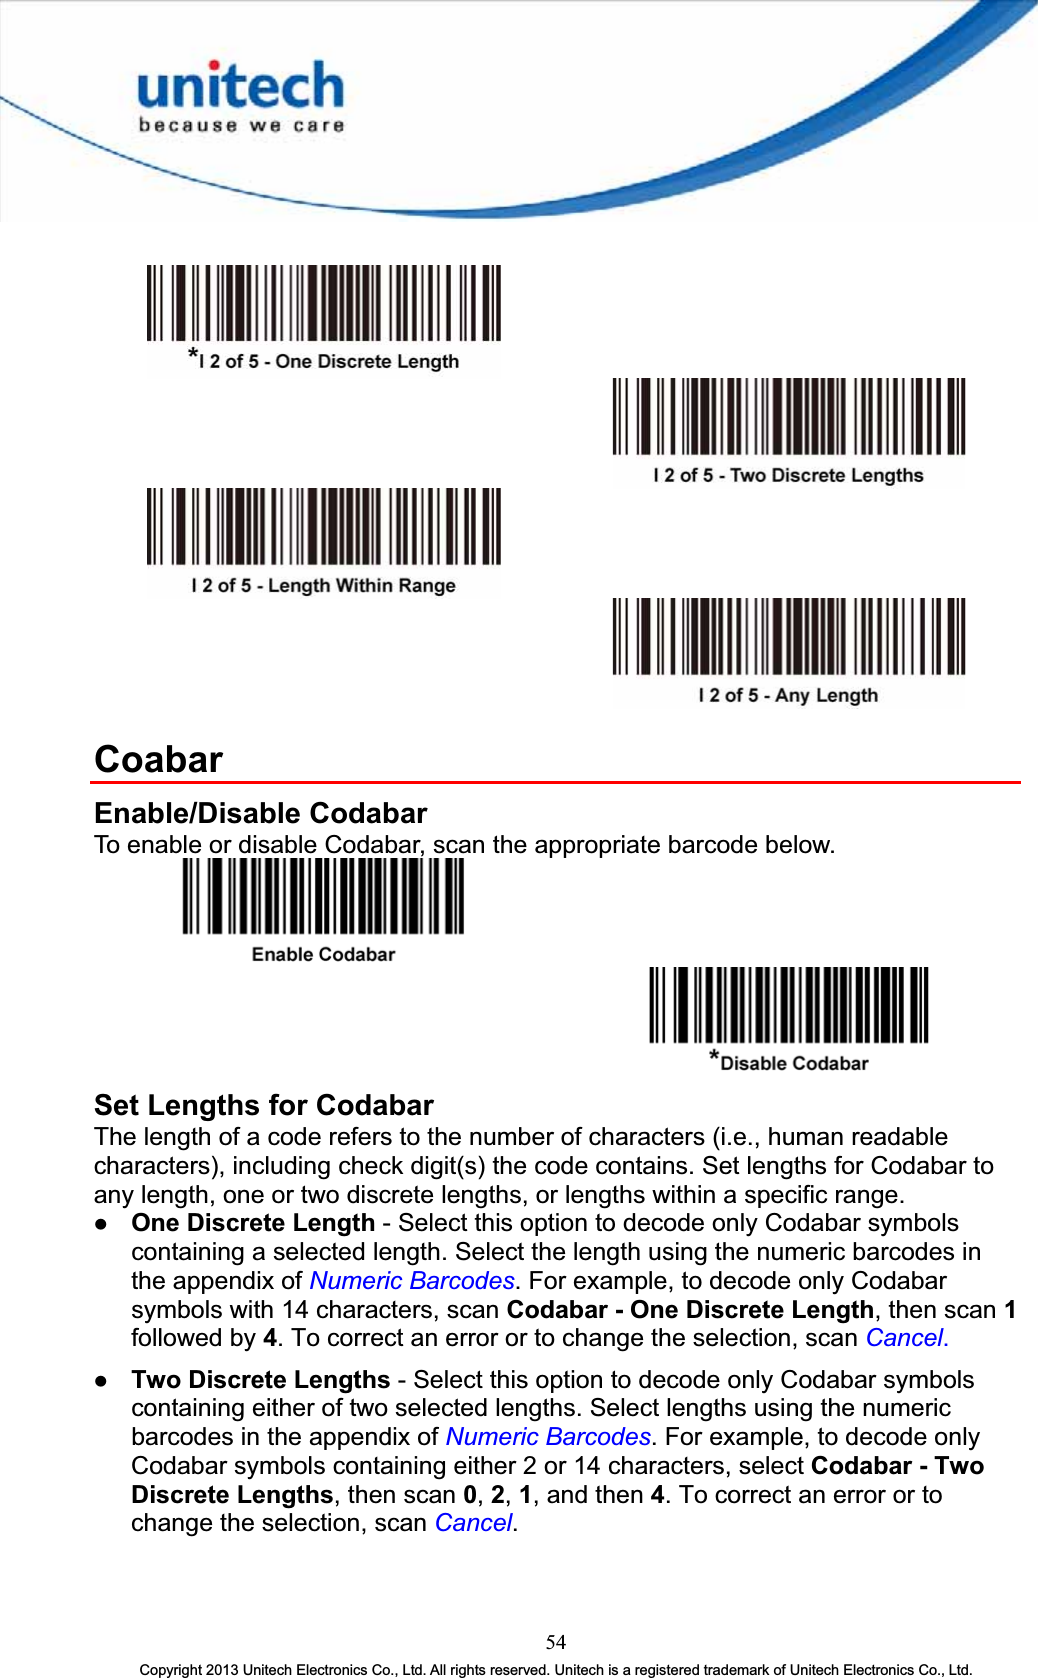 CoabarEnable/Disable Codabar To enable or disable Codabar, scan the appropriate barcode below. Set Lengths for Codabar The length of a code refers to the number of characters (i.e., human readable characters), including check digit(s) the code contains. Set lengths for Codabar to any length, one or two discrete lengths, or lengths within a specific range. z One Discrete Length - Select this option to decode only Codabar symbols containing a selected length. Select the length using the numeric barcodes in the appendix of Numeric Barcodes. For example, to decode only Codabar symbols with 14 characters, scan Codabar - One Discrete Length, then scan 1followed by 4. To correct an error or to change the selection, scan Cancel.z Two Discrete Lengths - Select this option to decode only Codabar symbols containing either of two selected lengths. Select lengths using the numeric barcodes in the appendix of Numeric Barcodes. For example, to decode only Codabar symbols containing either 2 or 14 characters, select Codabar - Two Discrete Lengths, then scan 0,2,1, and then 4. To correct an error or to change the selection, scan Cancel.54Copyright 2013 Unitech Electronics Co., Ltd. All rights reserved. Unitech is a registered trademark of Unitech Electronics Co., Ltd. 